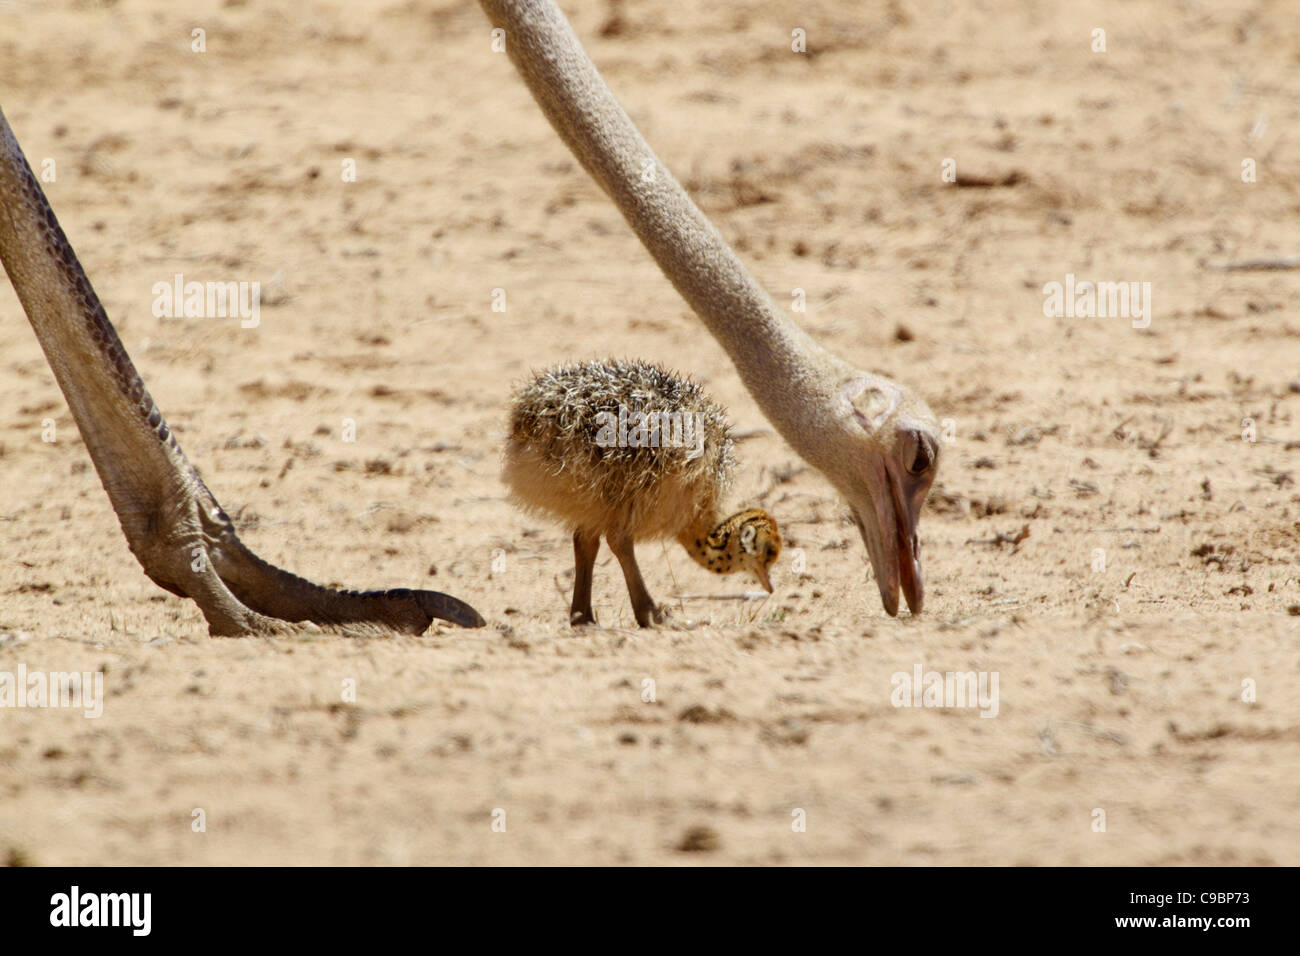 An Ostrich and its chick looking for food, Kgalagadi Transfrontier Park, Northern Cape Province, South Africa Stock Photo